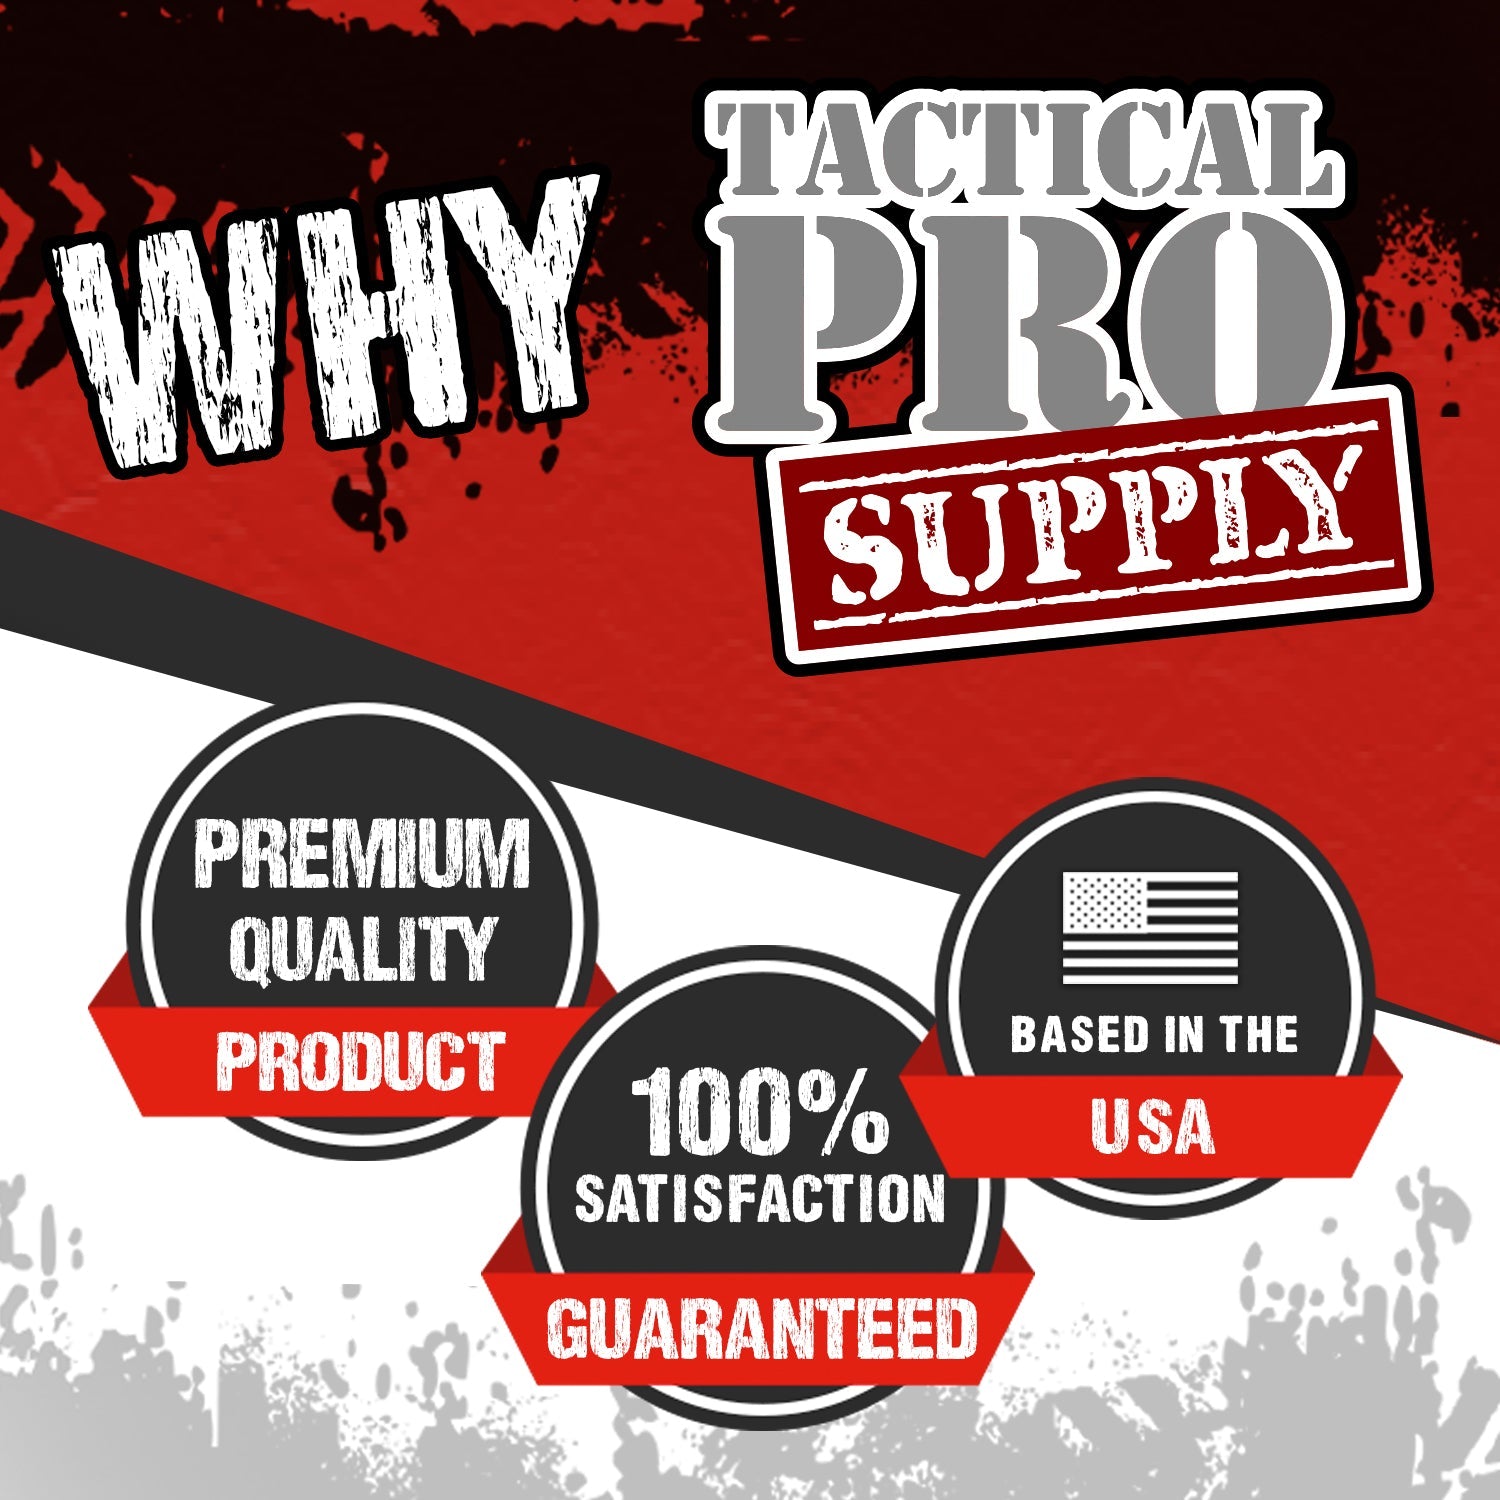 Rights Don't End - Tactical Pro Supply, LLC